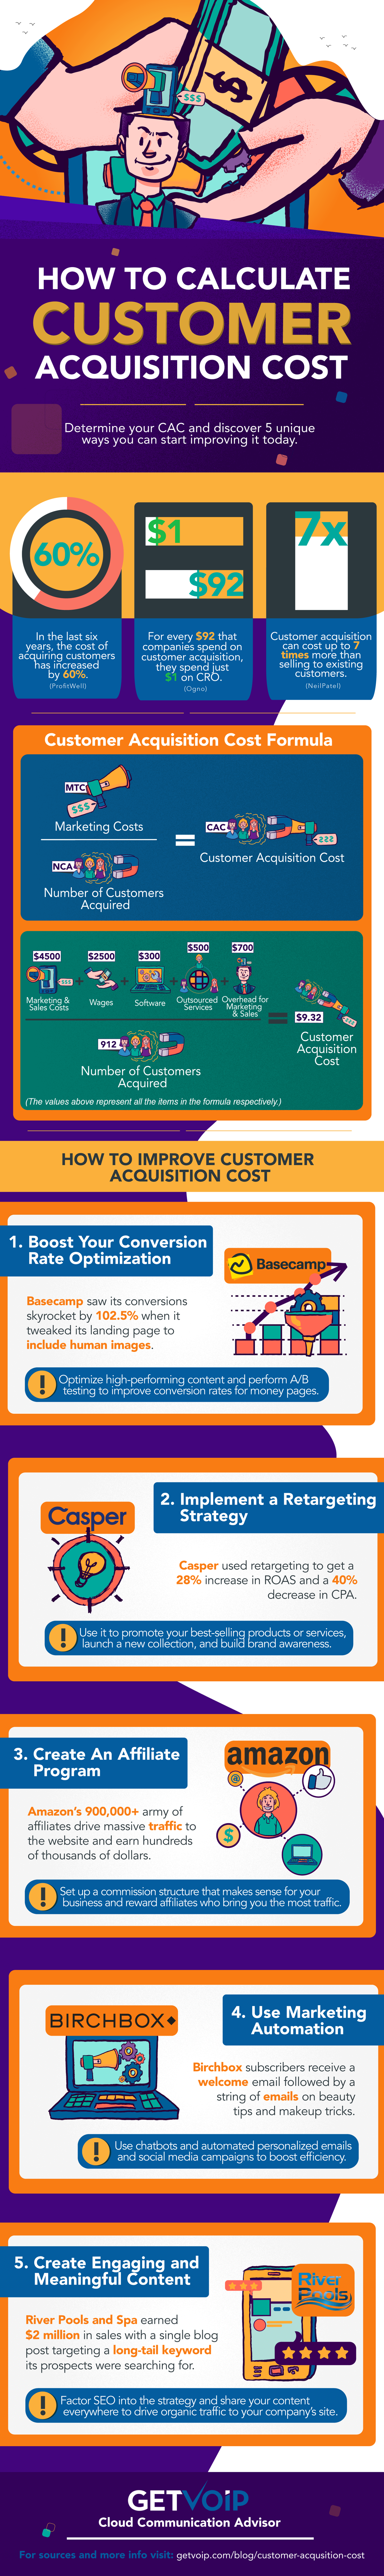 Guide to calculating customer acquisiton costs